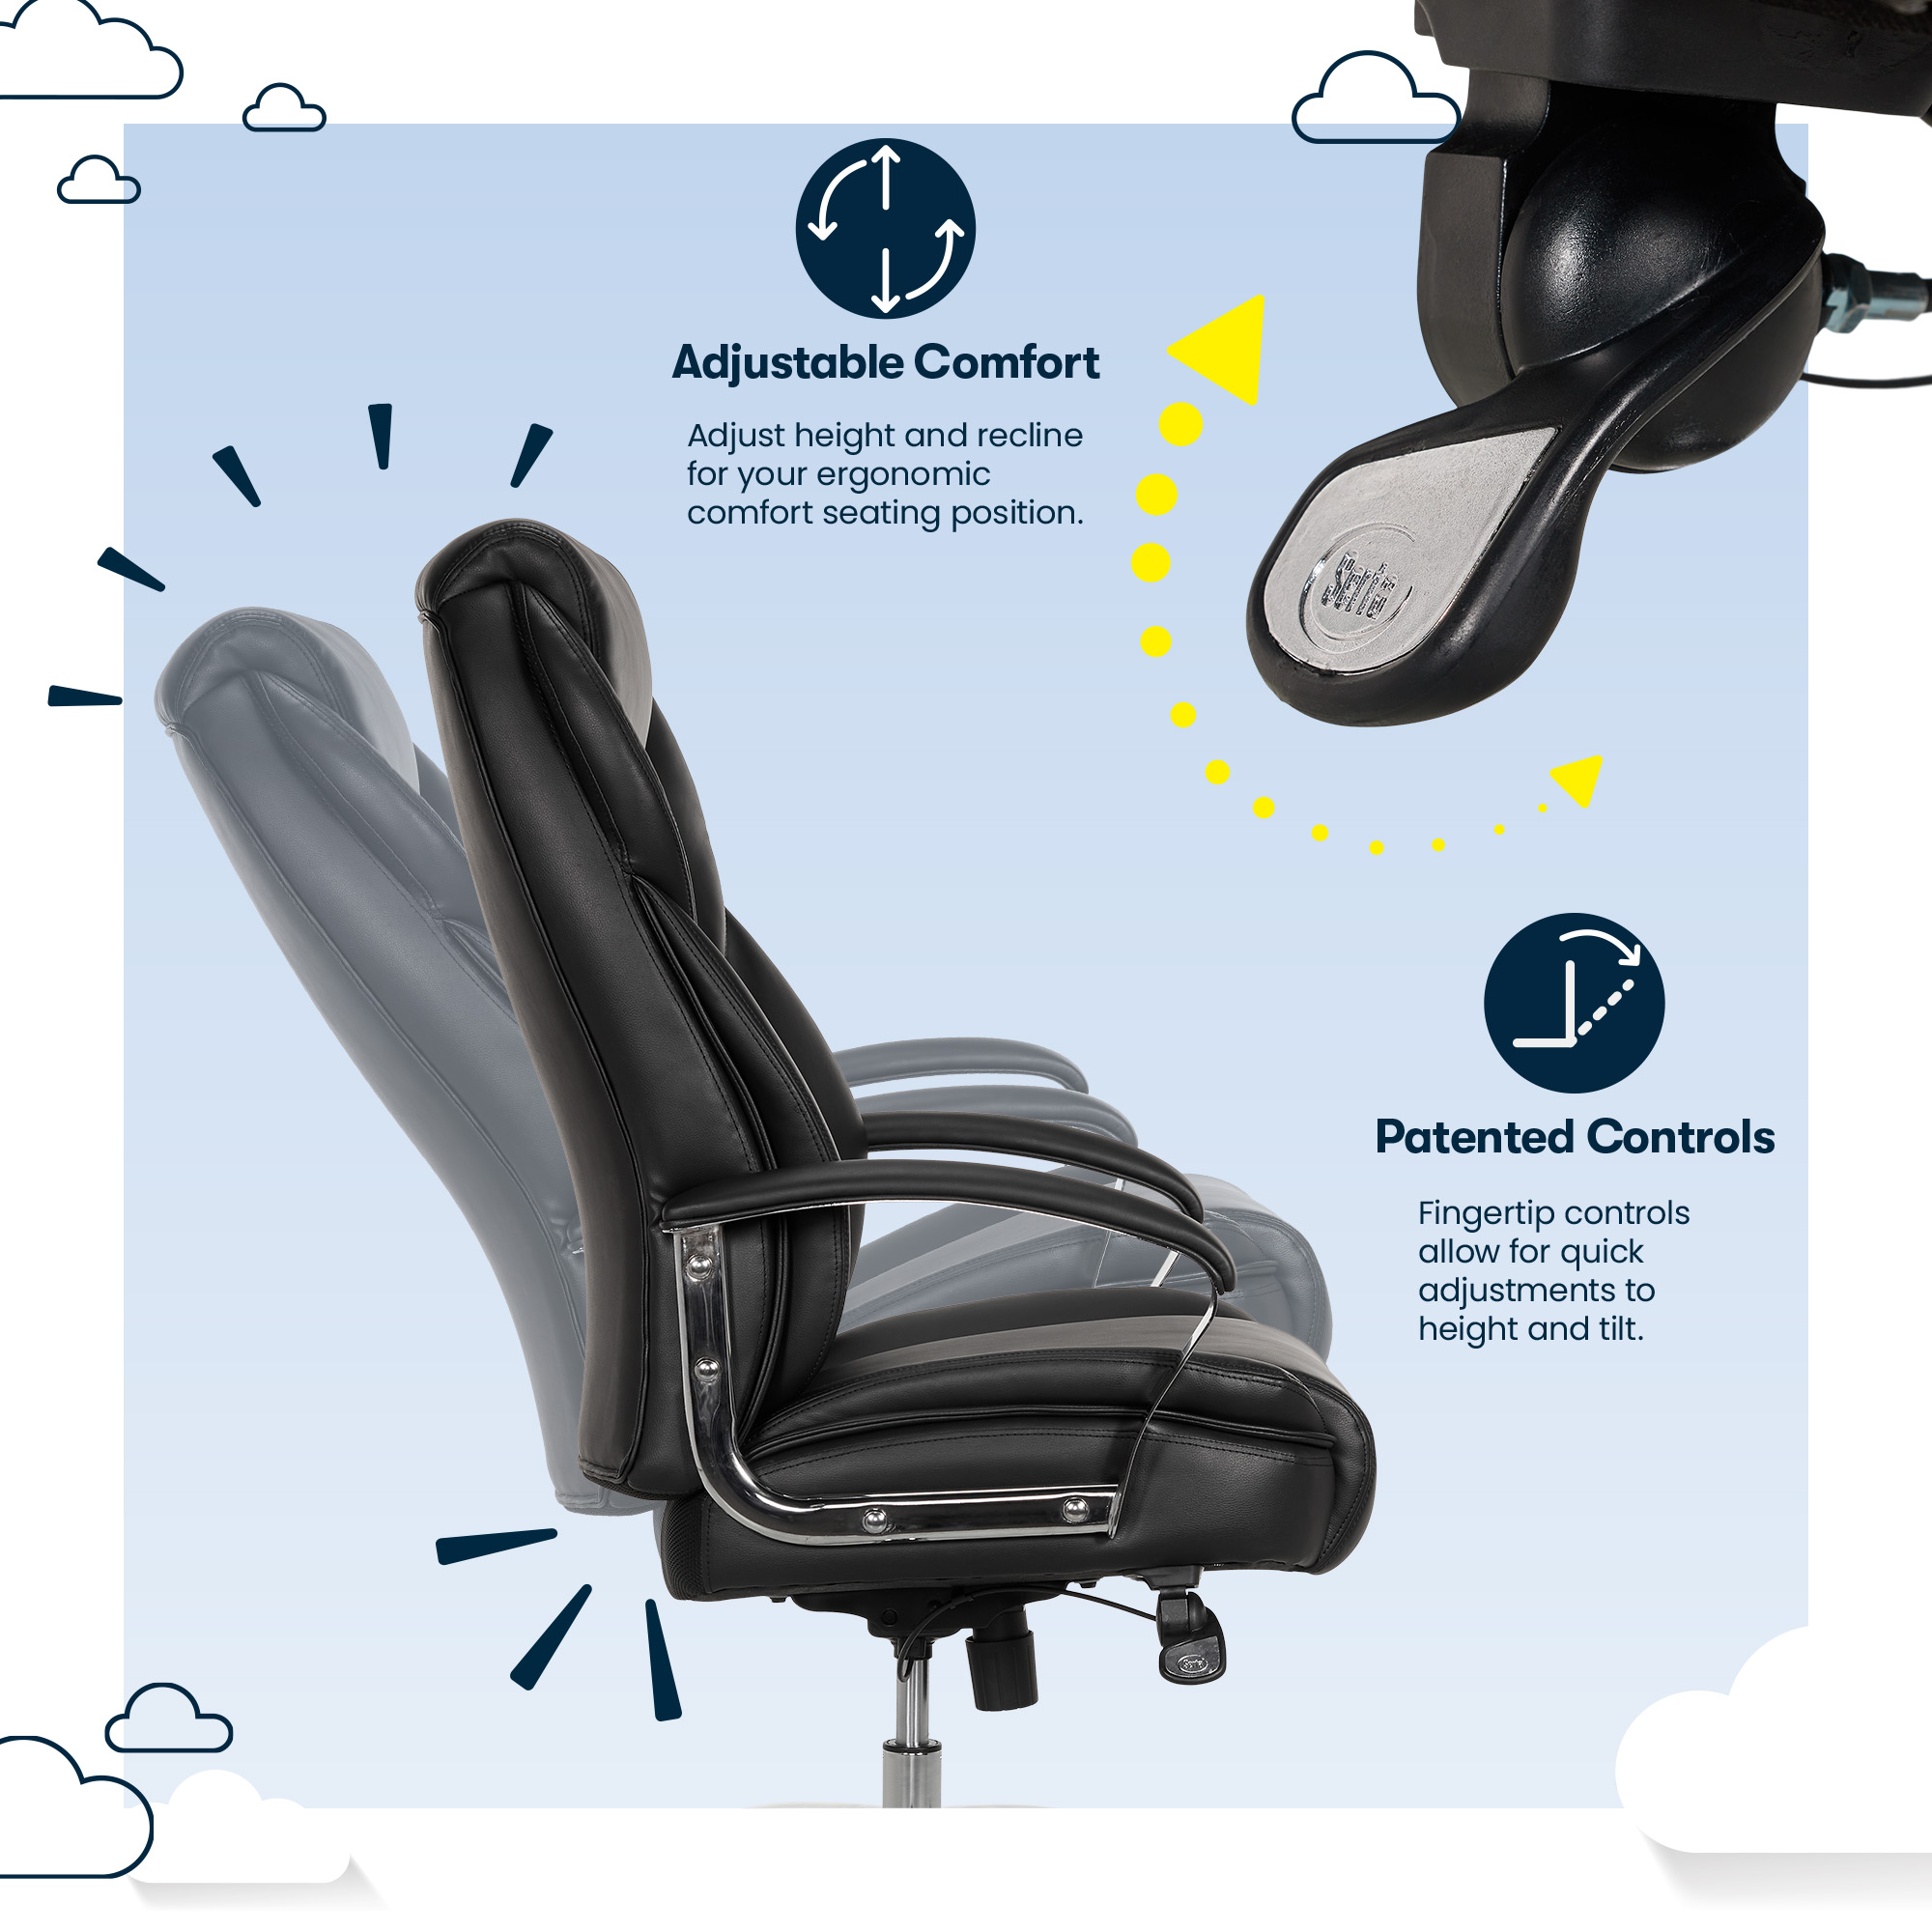 Serta Big & Tall High Back Office Chair, Heavy Duty Weight Rating, Black Bonded Leather Upholstery - image 5 of 12